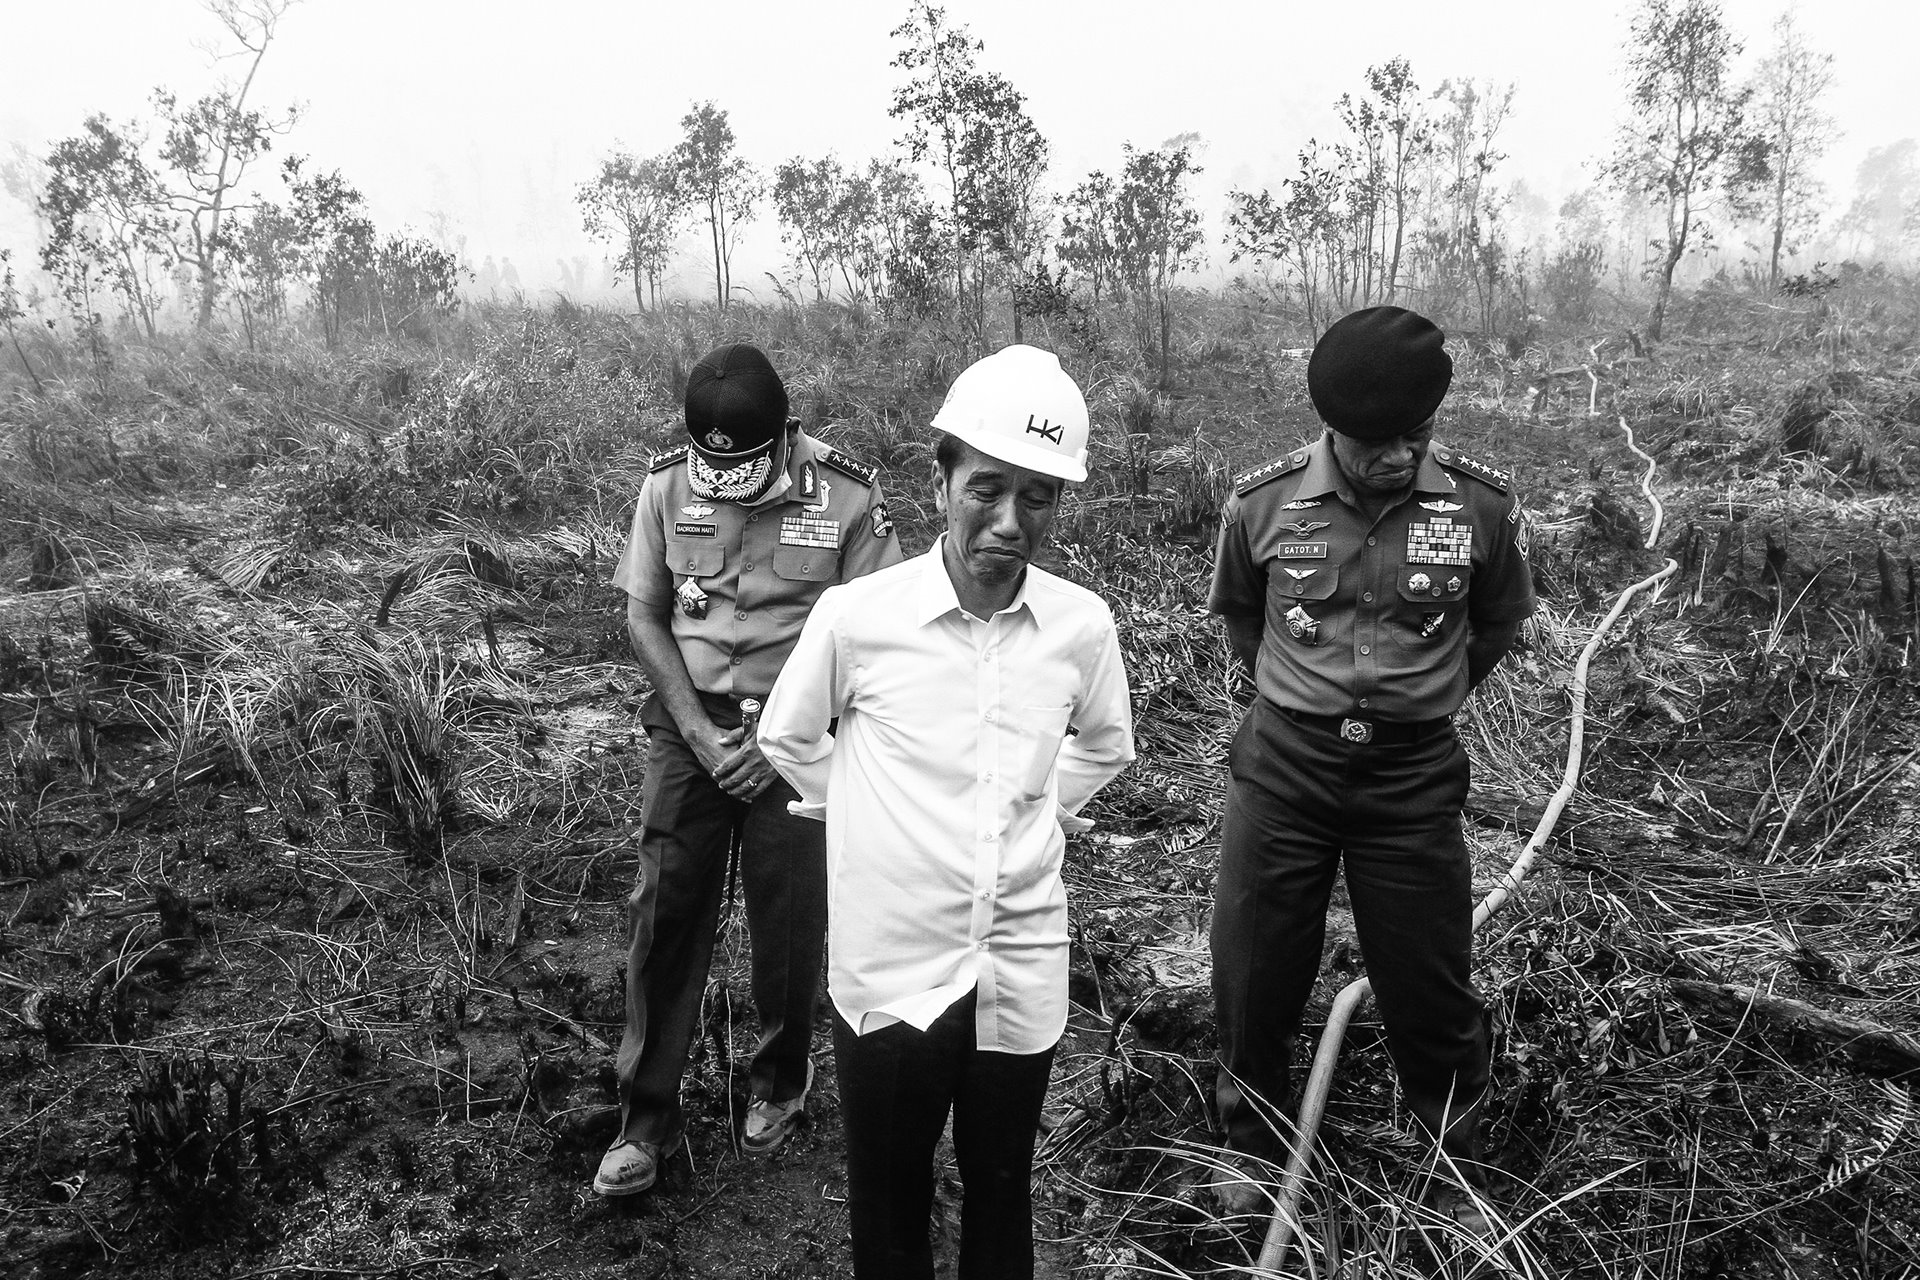 <p>Indonesian President Joko Widodo (center) accompanied by National Police Chief General Badarudin Haiti (left) and Indonesian National Military Commander General Gatot Nurmantyo (right) inspecting devastation caused by fire in Ogan Komering Ilir, South Sumatra. During this visit the president took action to punish companies that intentionally burn peatlands to plant oil palms.</p>
